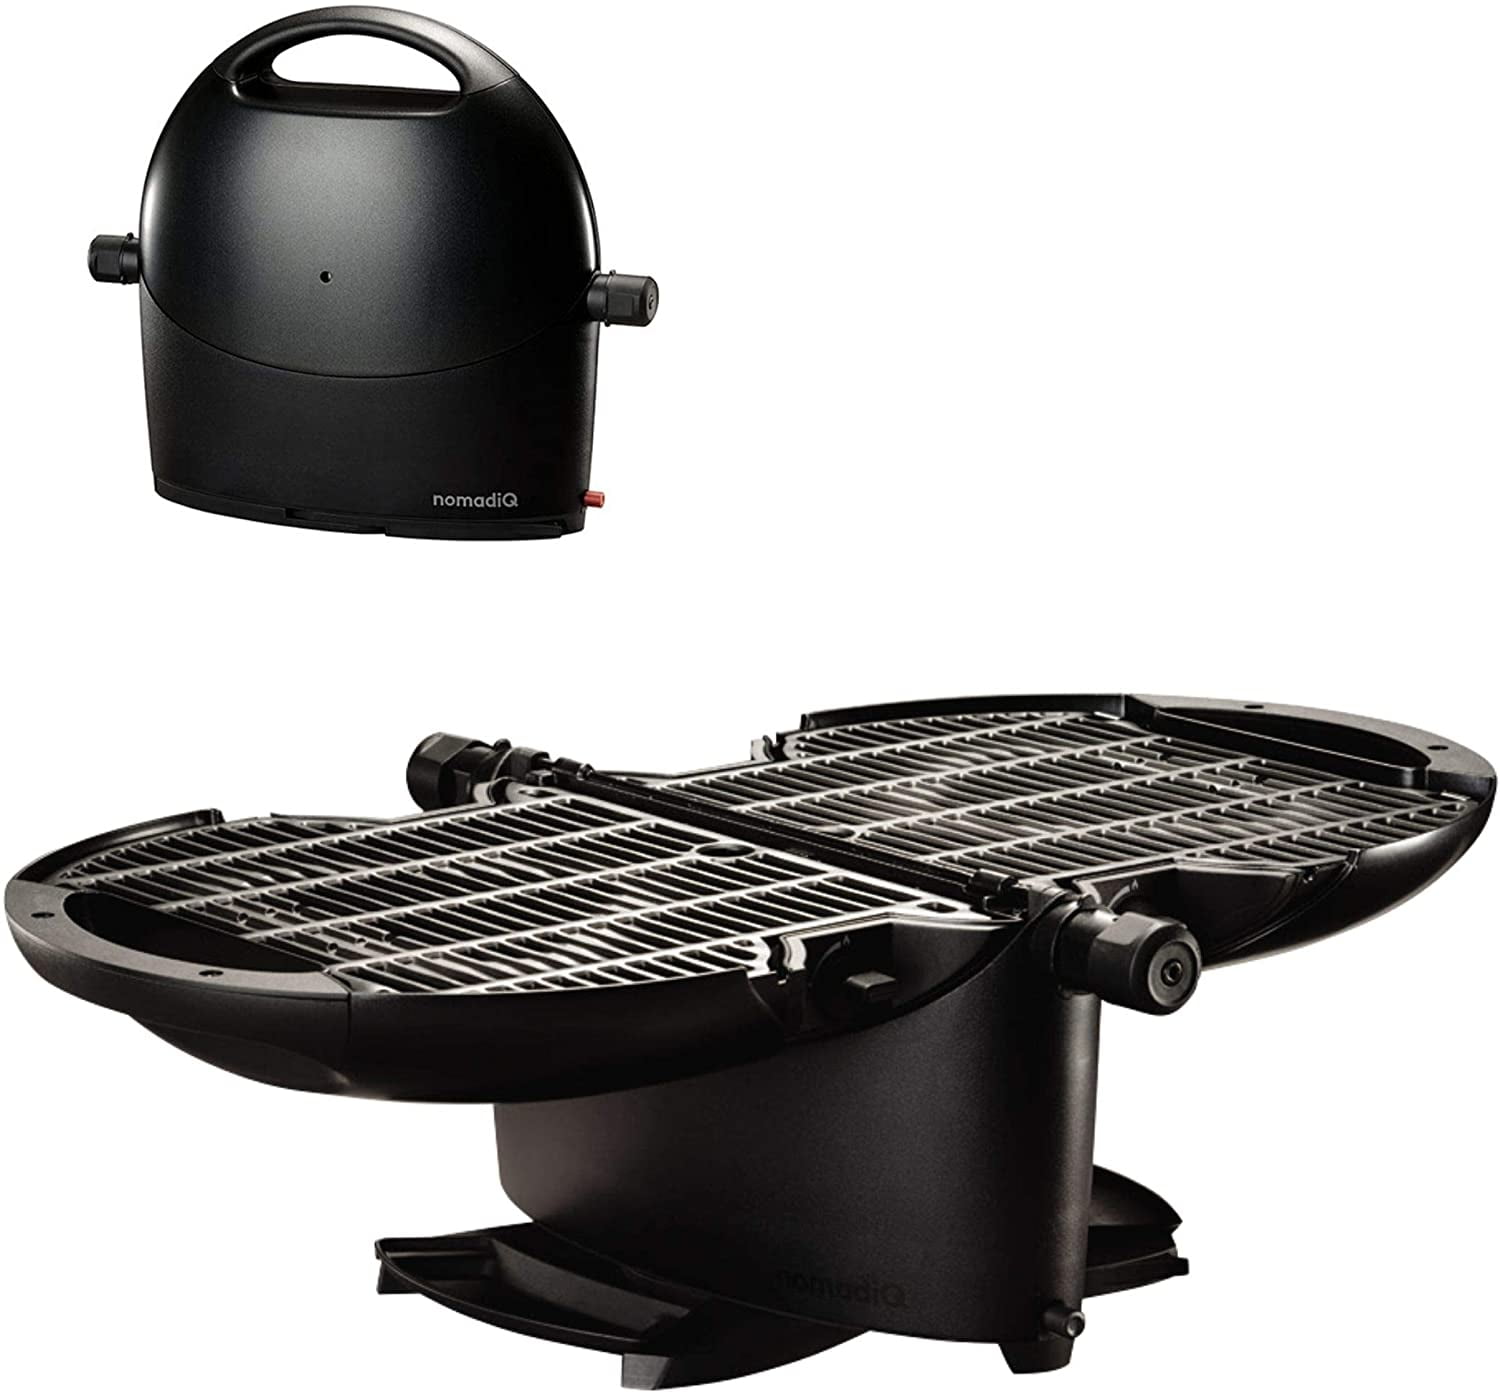 NOMADIQ Portable Propane Gas Grill Small, Mini, Lightweight Tabletop BBQ Perfect for Camping